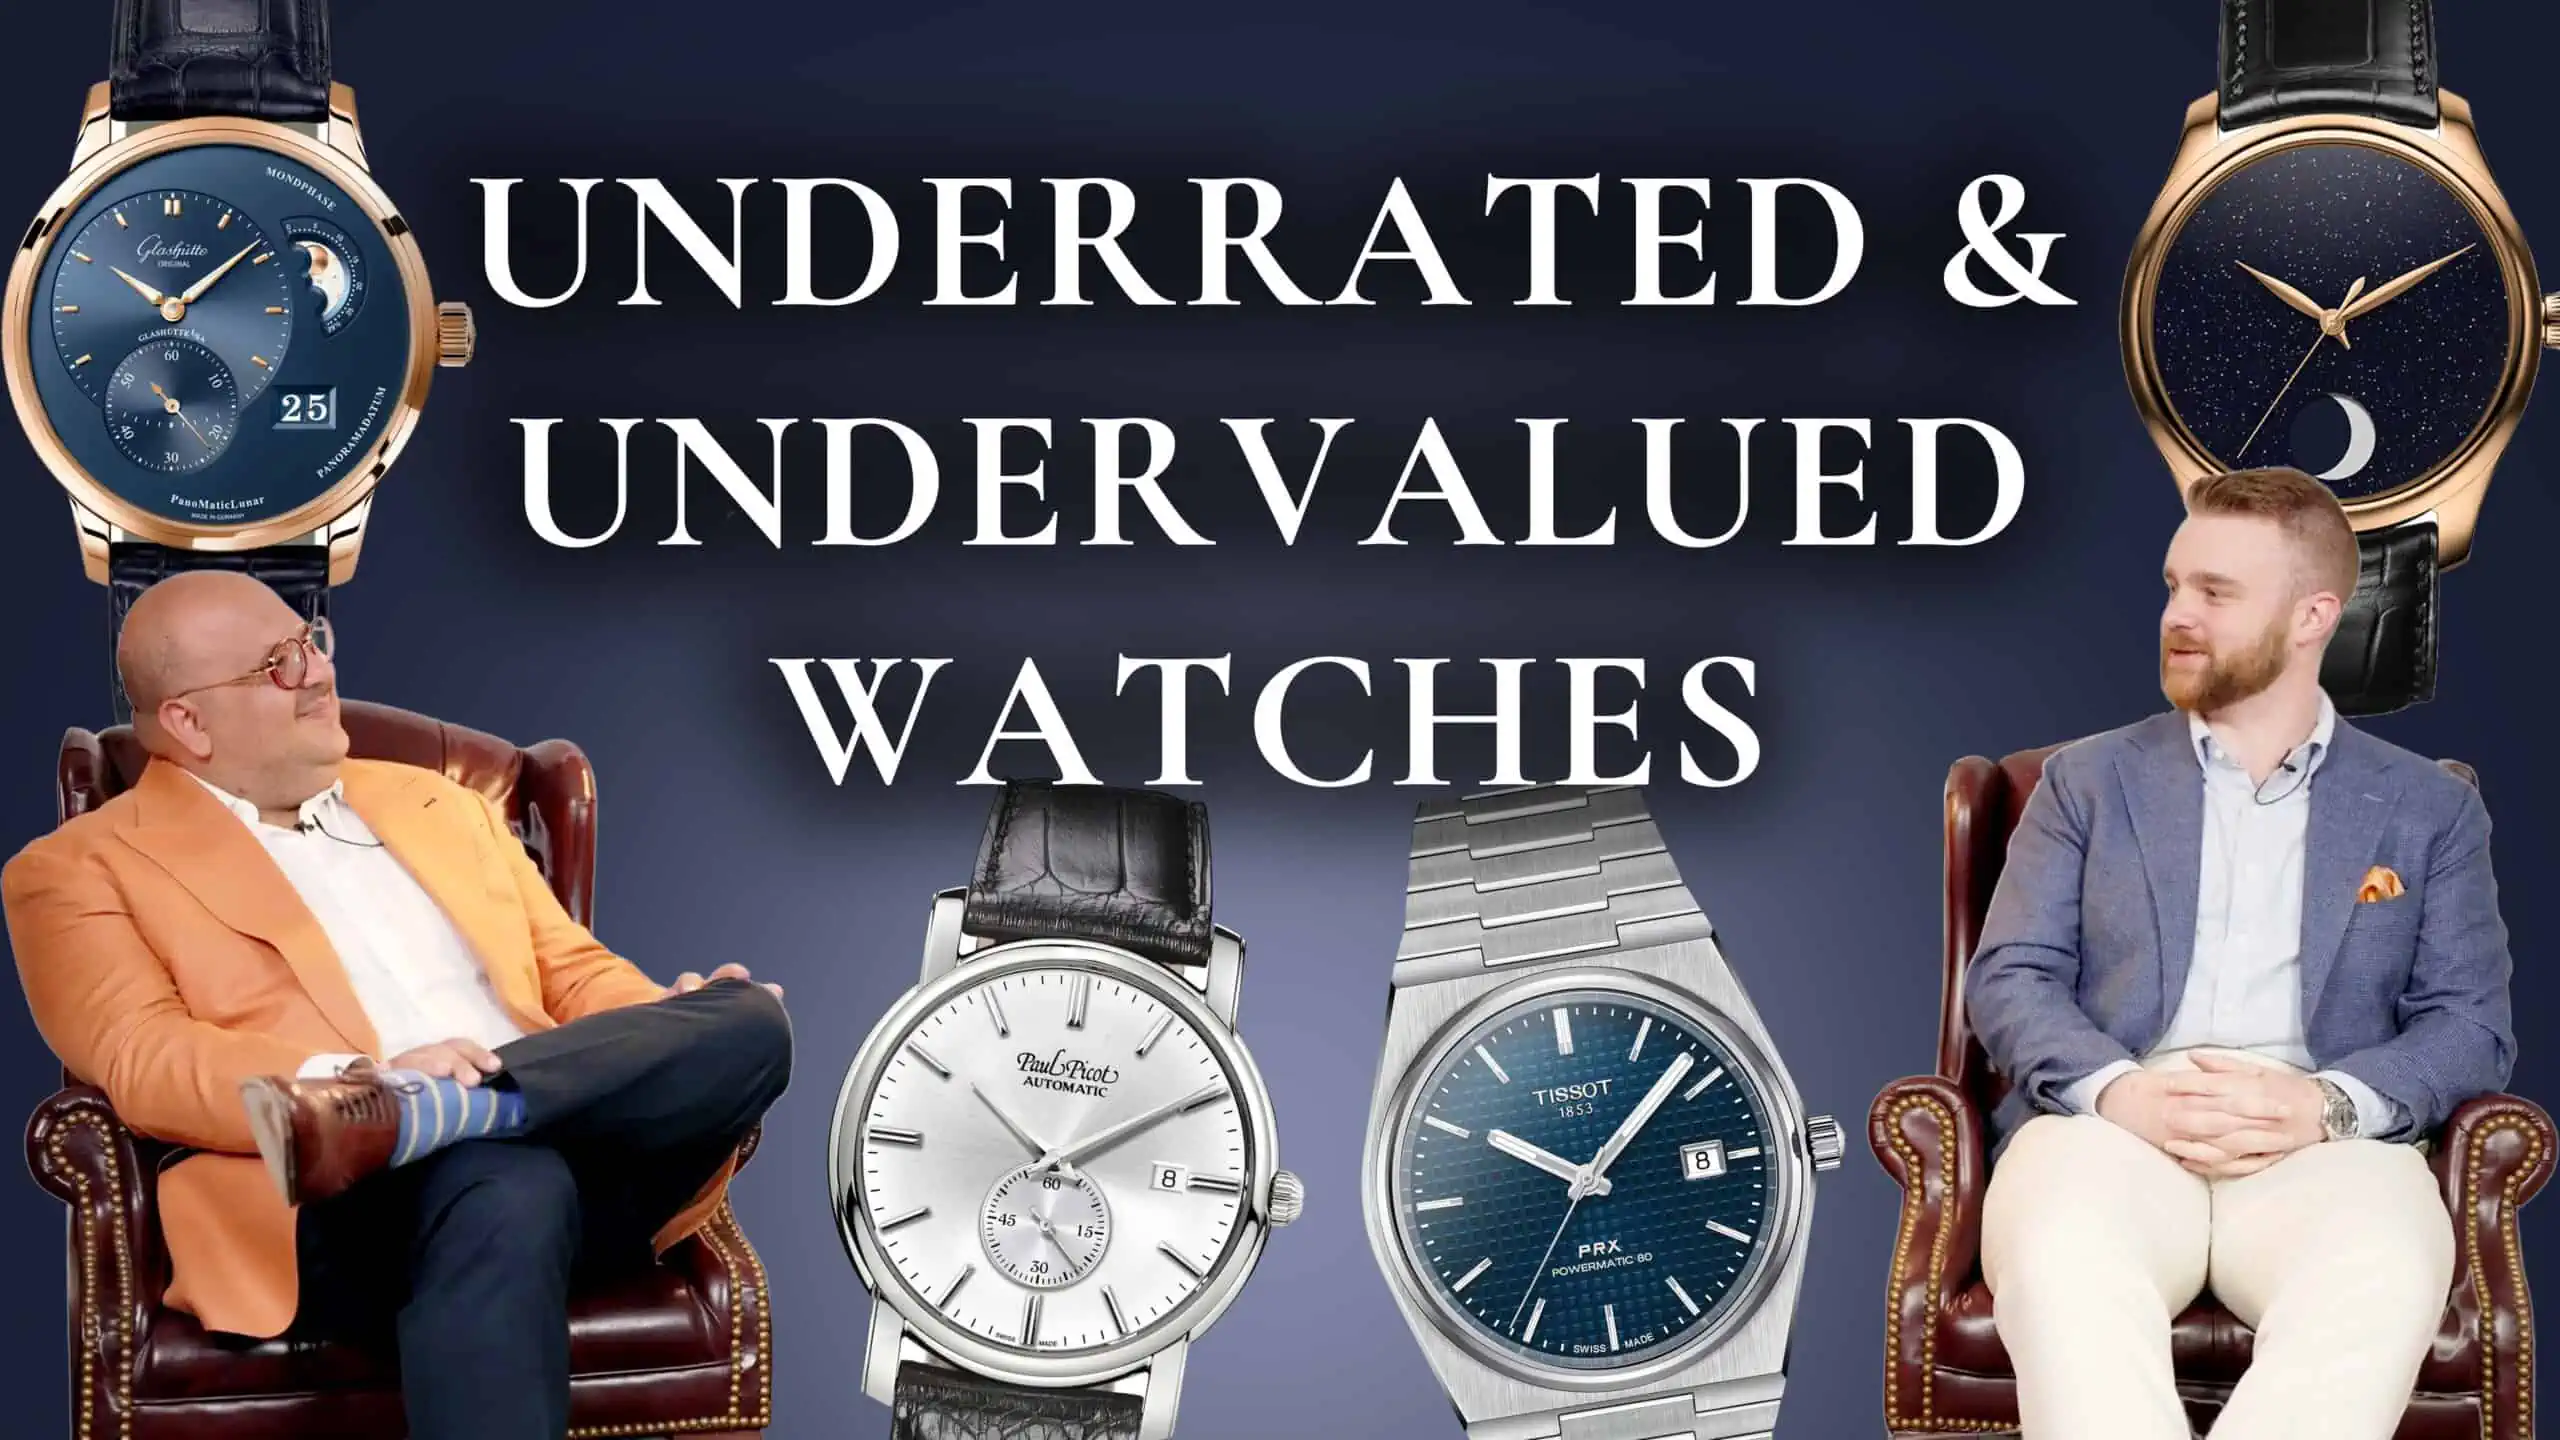 Underrated Undervalued Watches 3840x2160 scaled